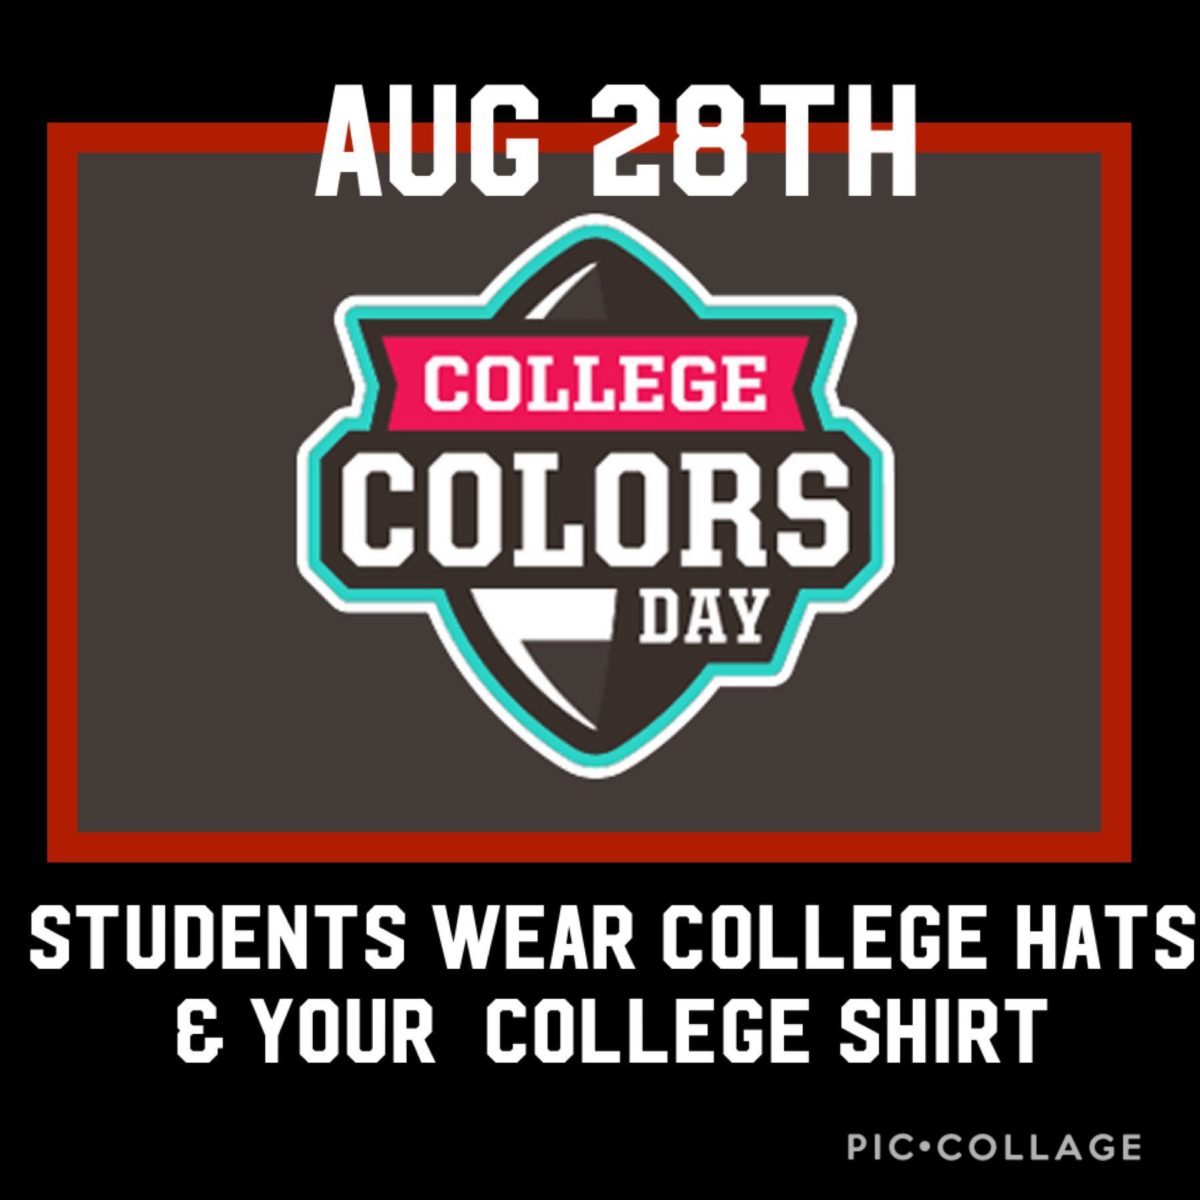 Support Higher Education, Participate in College Colors Day Aug. 28